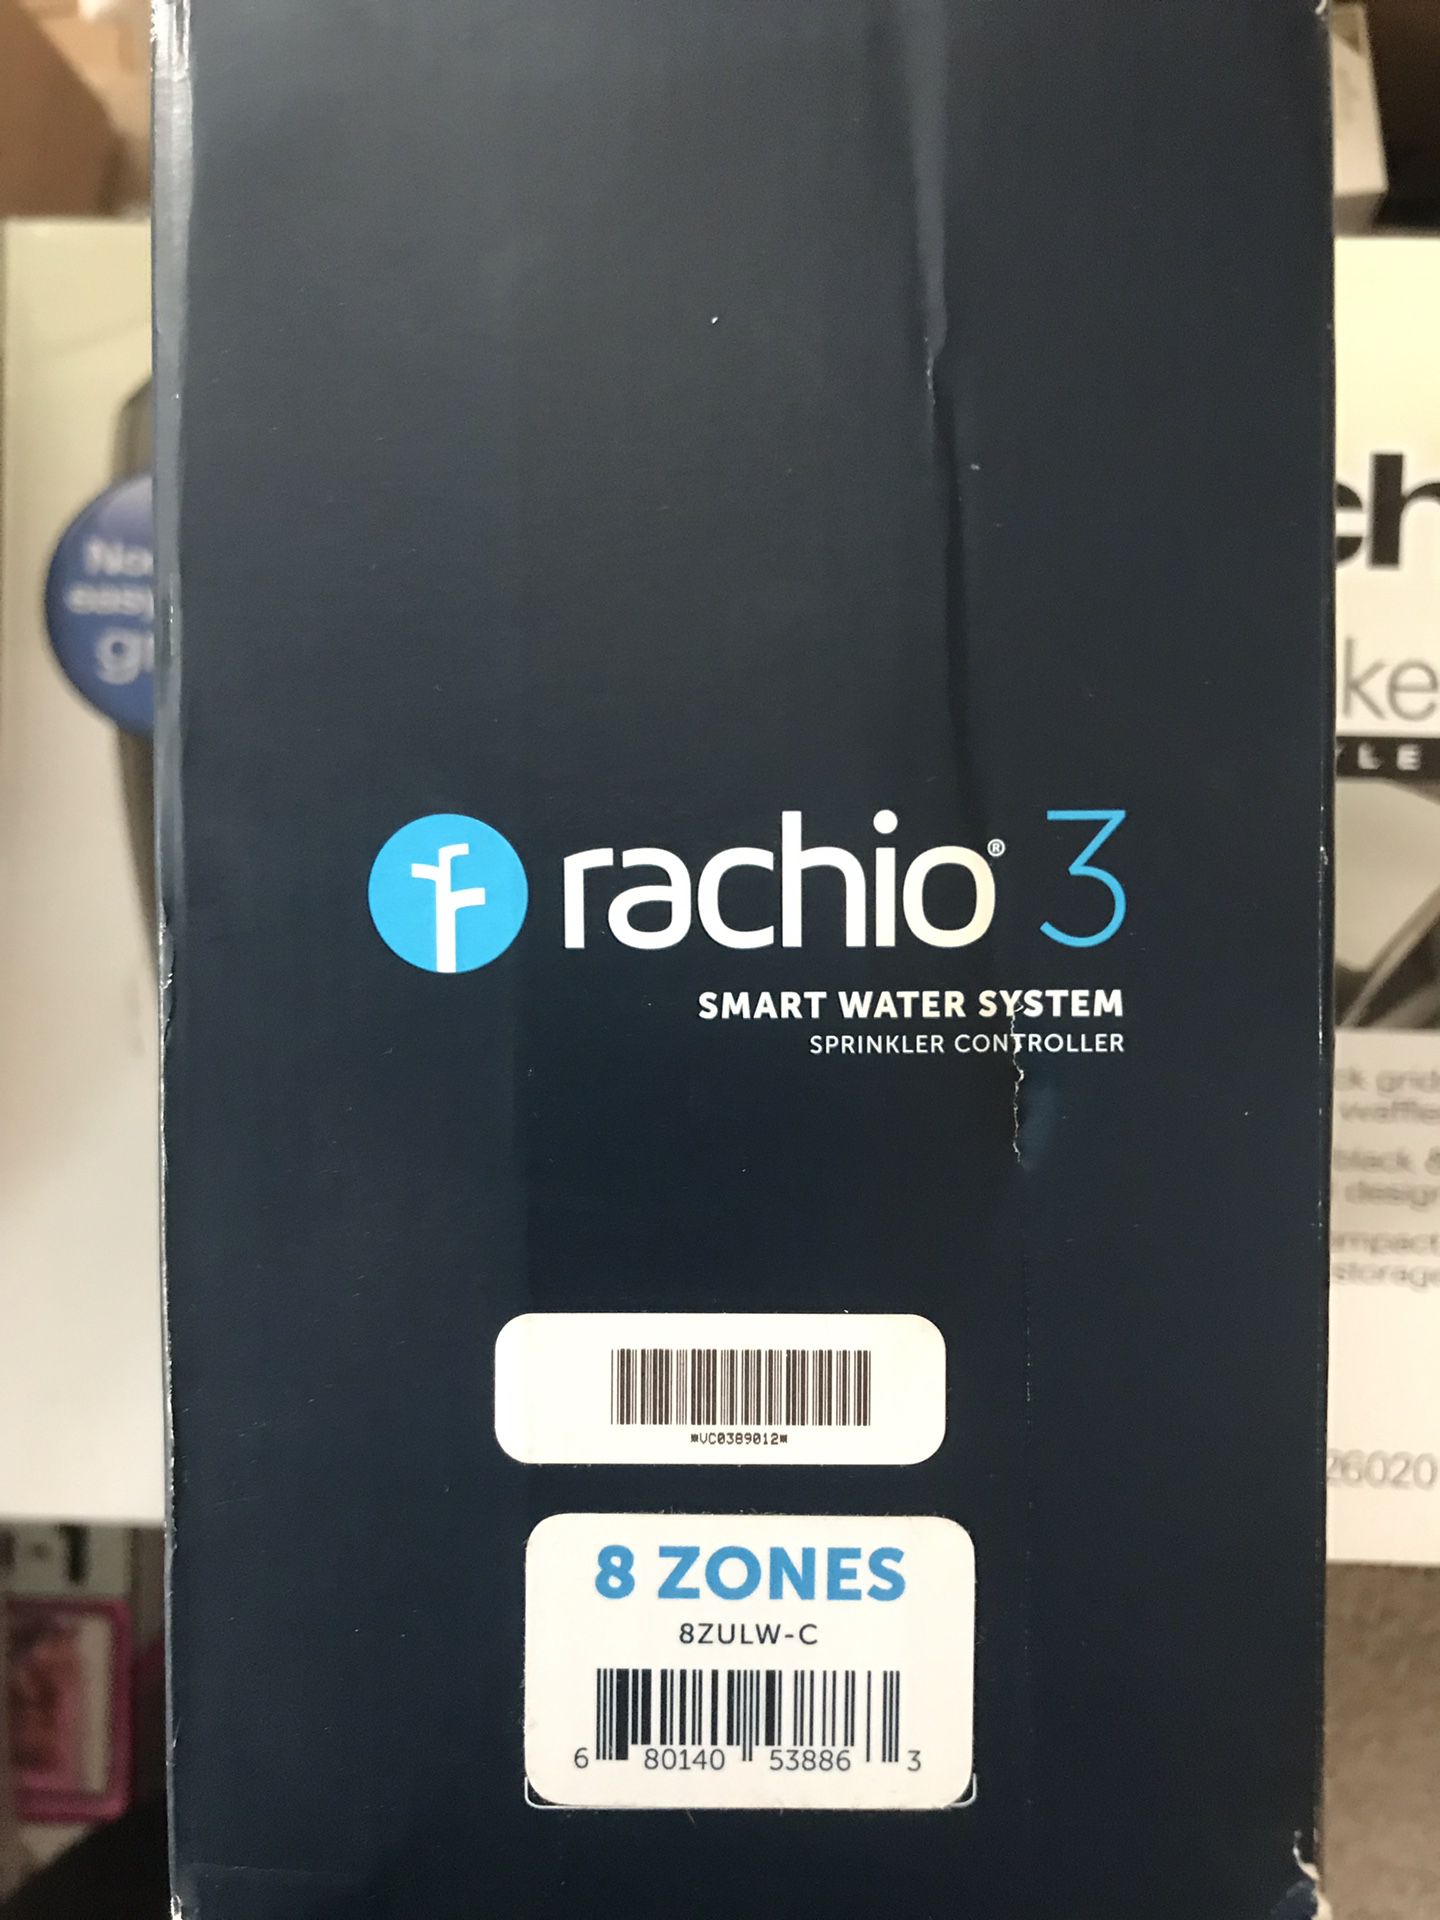 Rachio 3 Brand new in box, never installed Rachio 3 smart sprinkler controller. 8 zone WiFi connection to your smart home, Alexa, google, and other